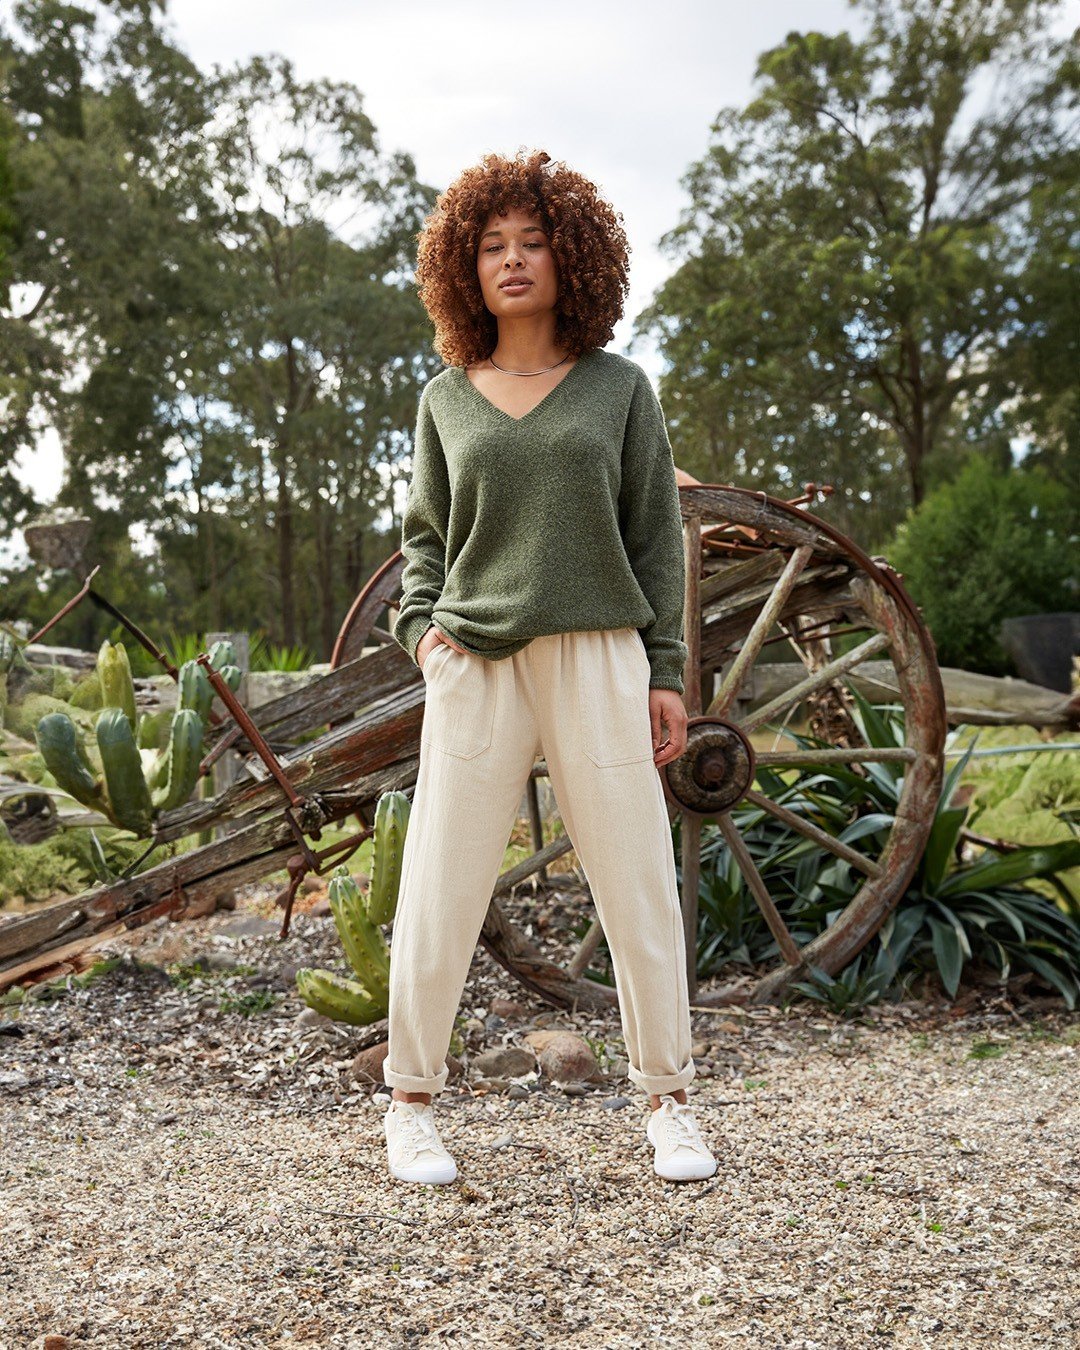 For laidback days☁️, look no further than the Sammi Pant from @ebandivelifestyle. This linen-blend pant transcends seasons with a loose-fit design, tapered ankle and elasticated waist drawstring. Available in Thyme, Oat and Graphite.⁠
⁠
_____________